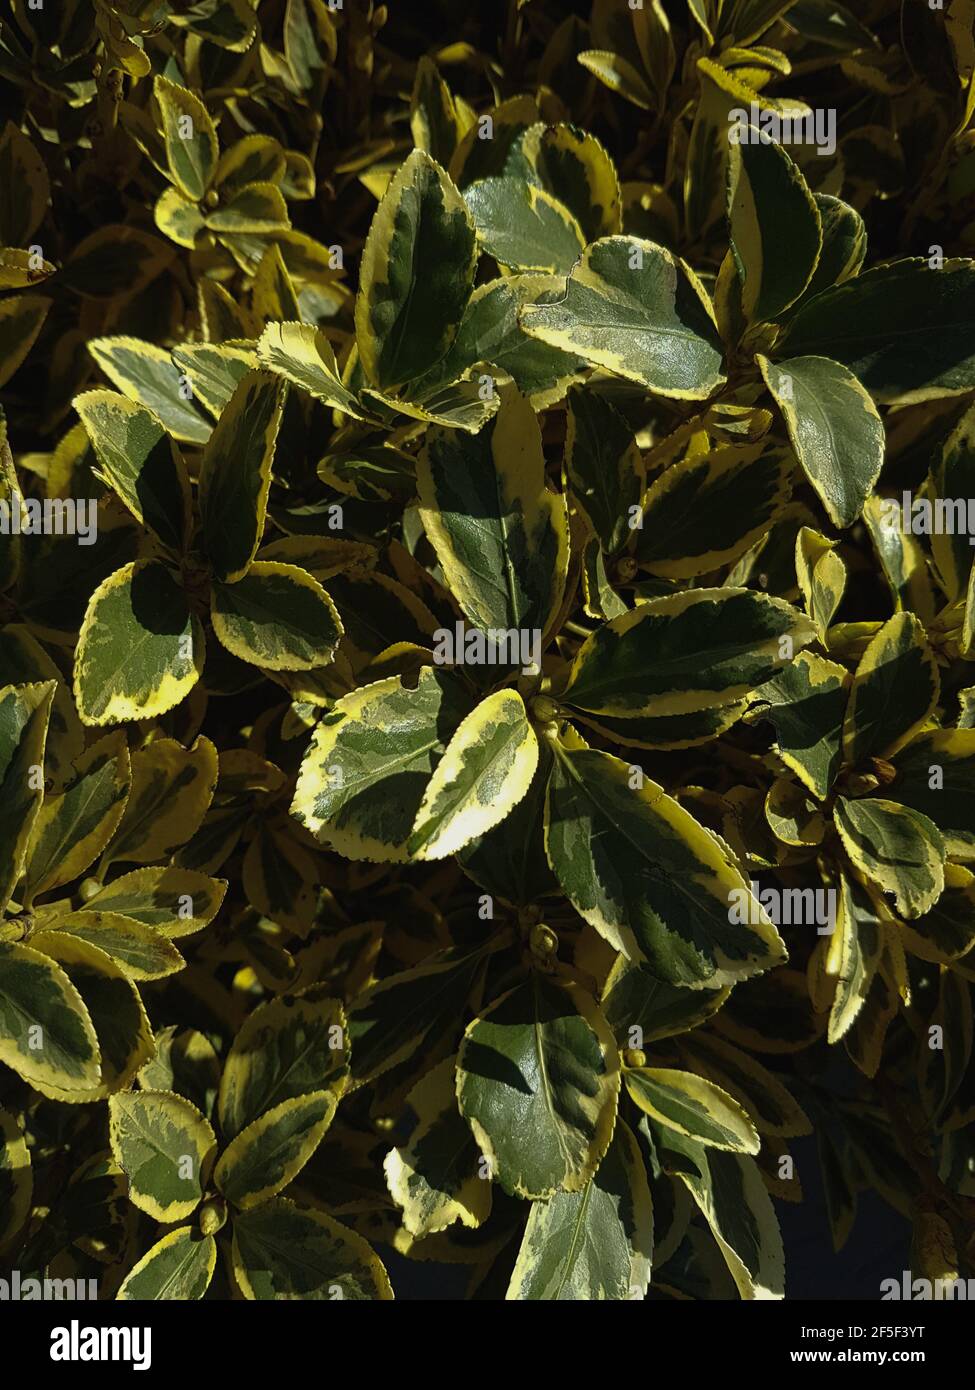 Holly leaves texture close-up Nature background Stock Photo